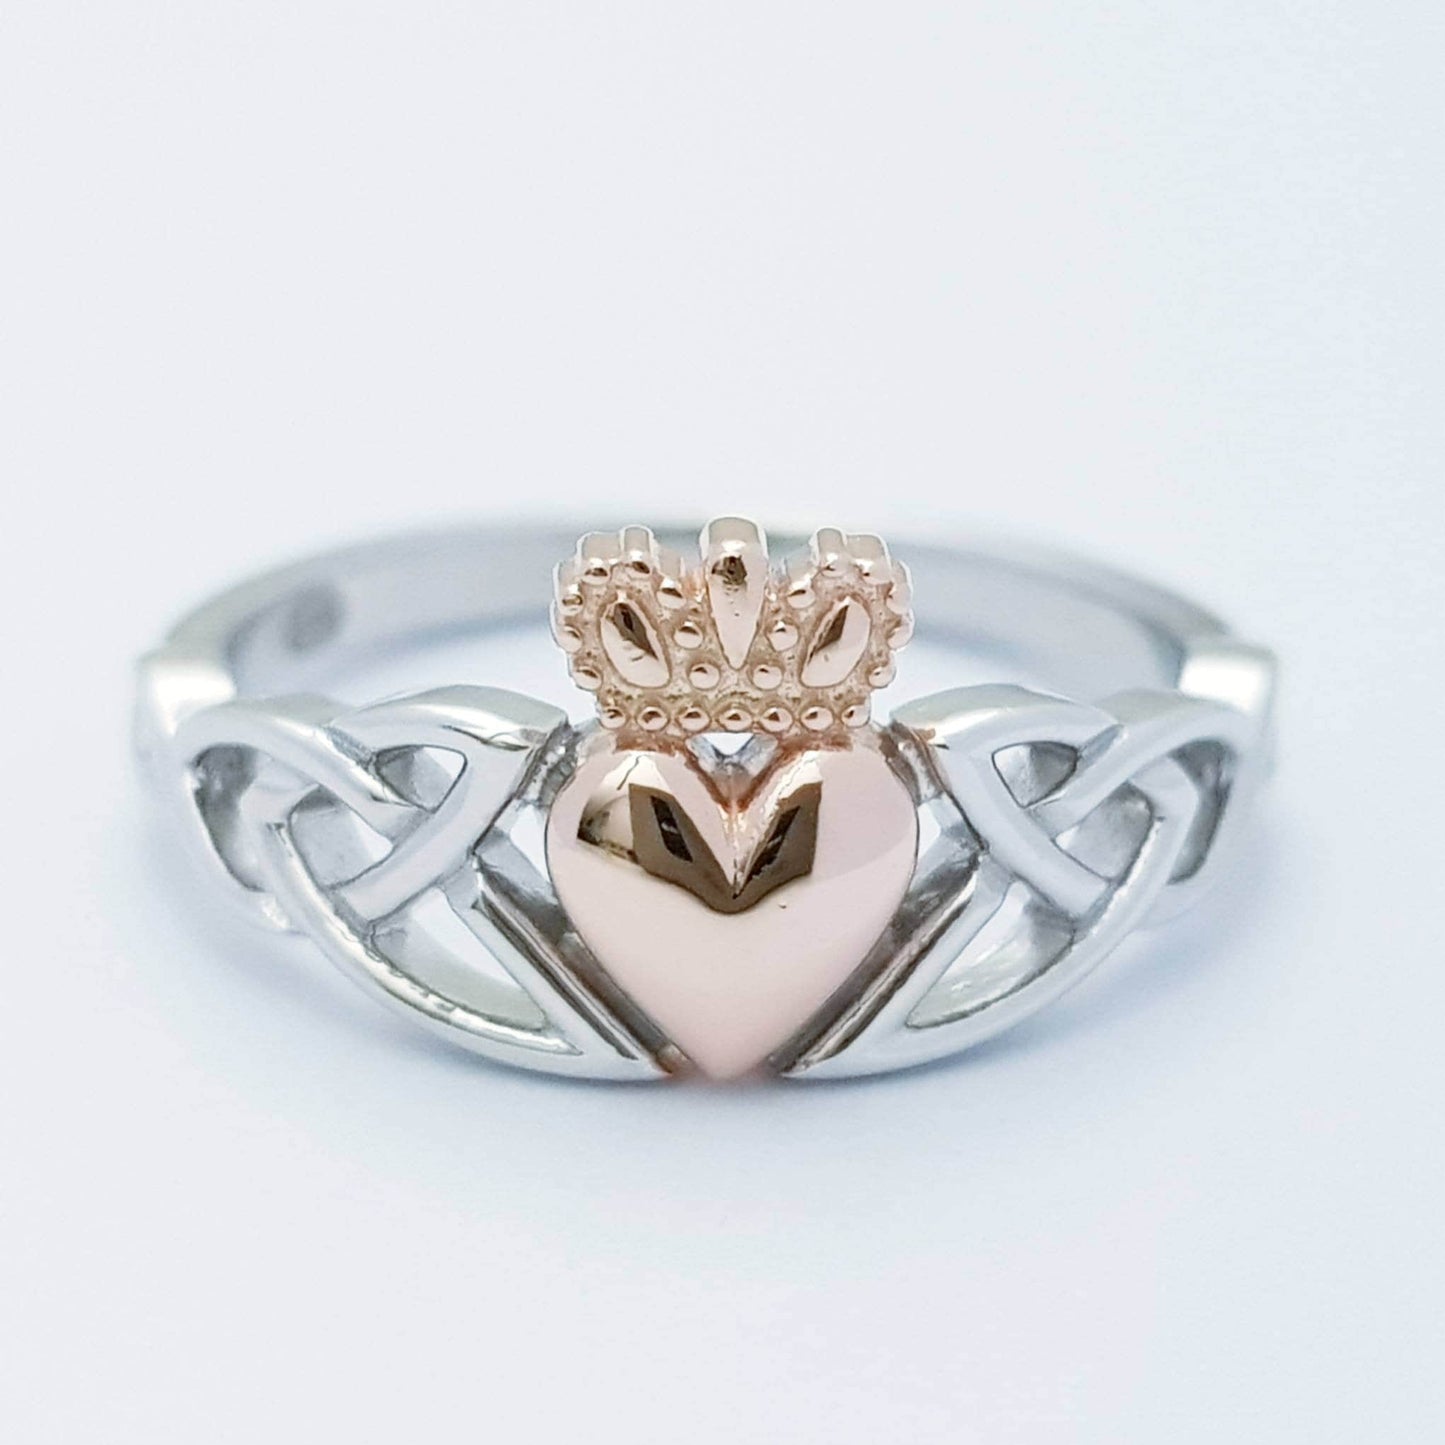 Sterling Silver Claddagh ring, rose gold celtic Knot Claddagh Ring, Irish heart and hands Ring